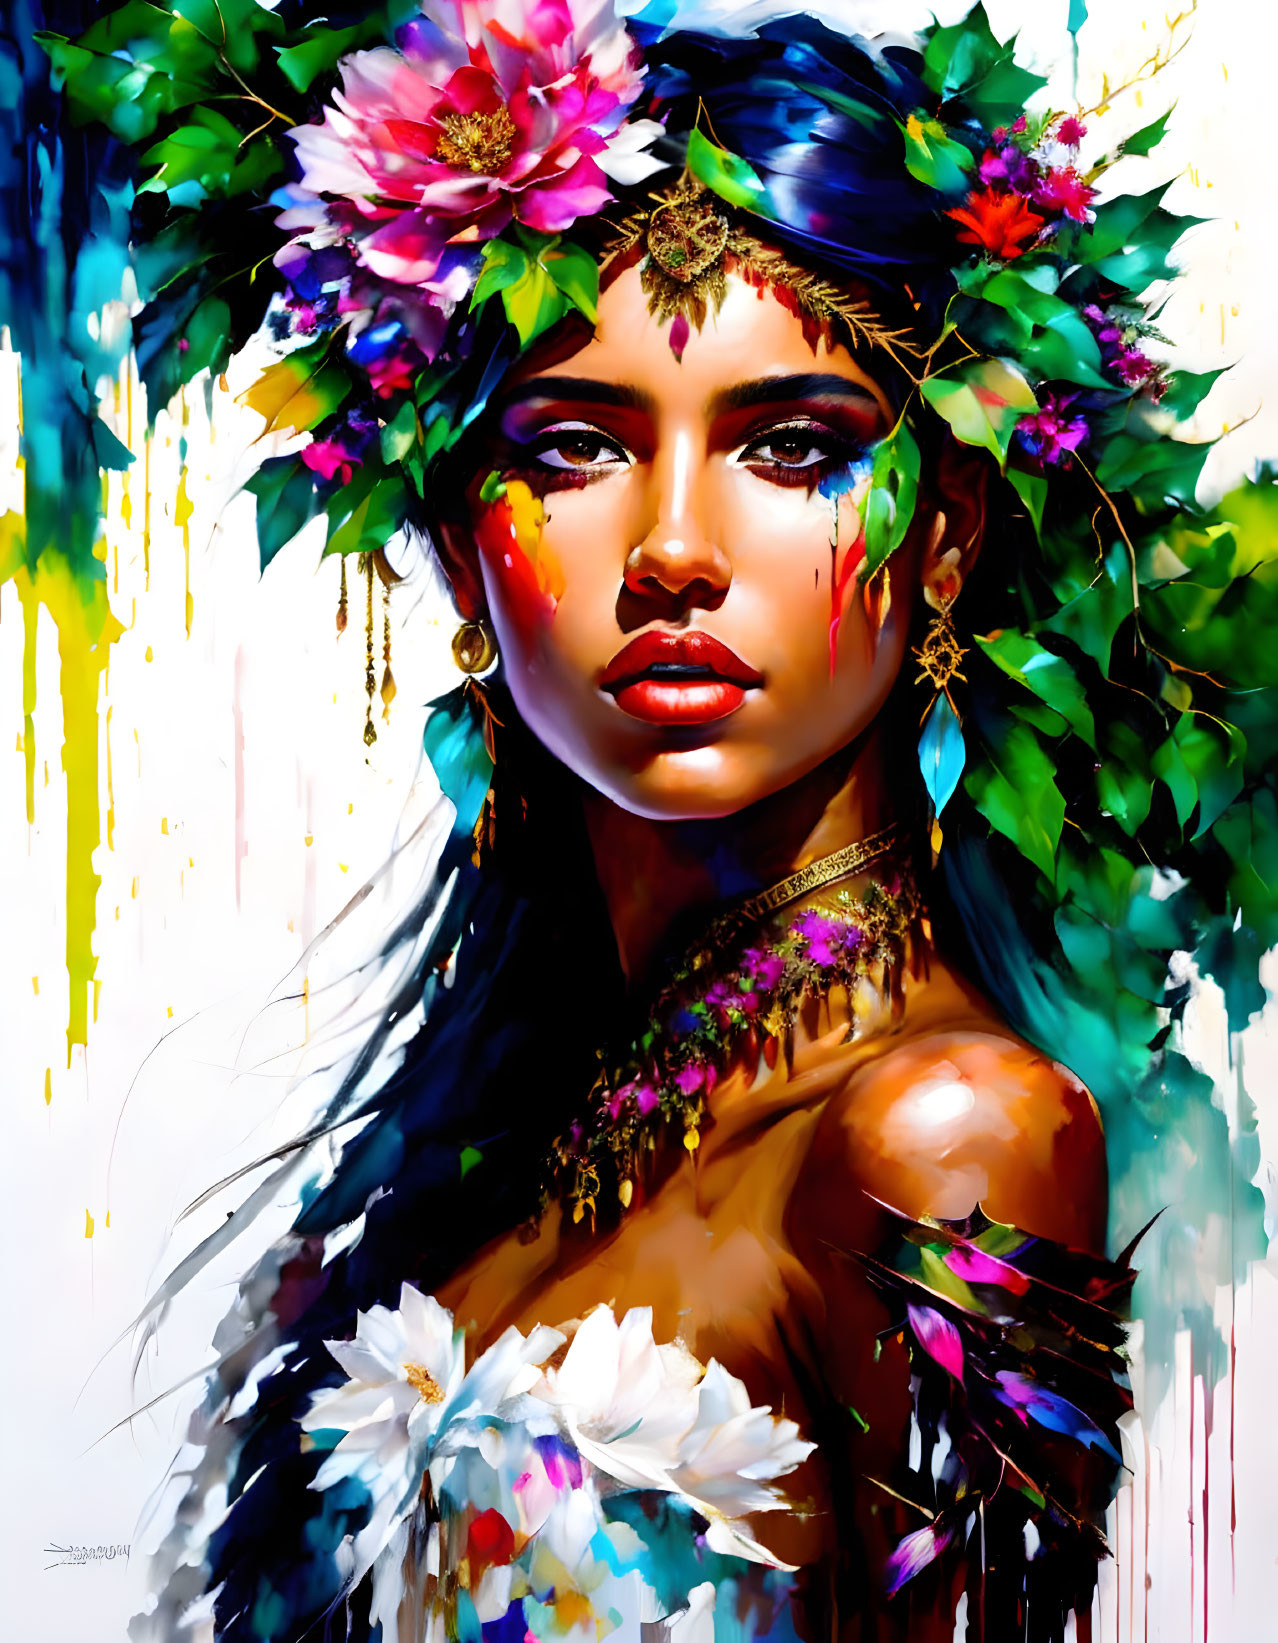 Colorful portrait of a woman with floral headdress and vibrant paint drips